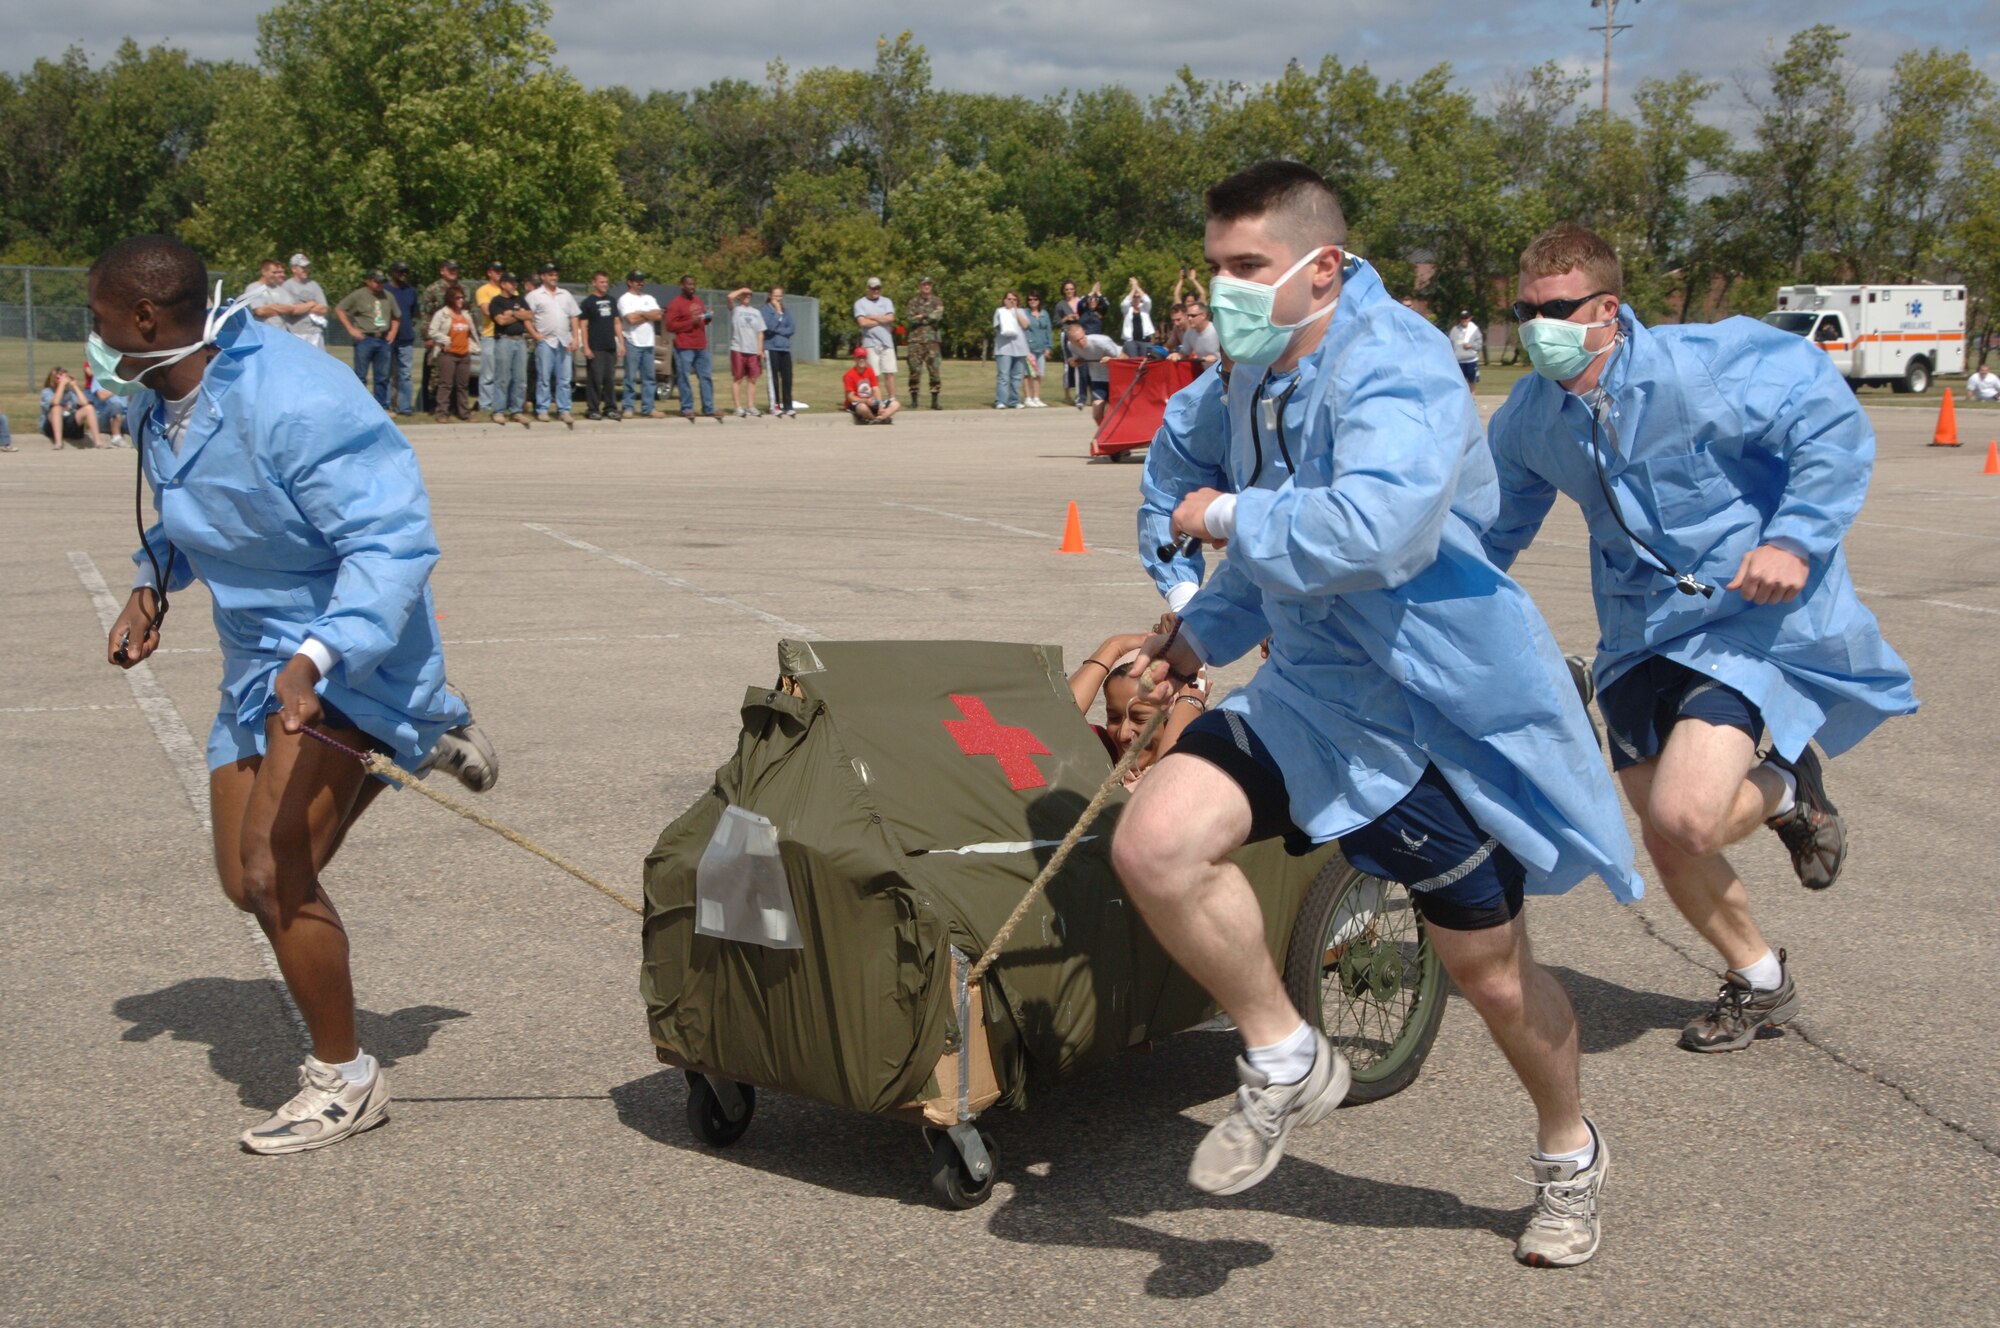 Airman First Class Clarissa Garza, 319th Mission Support and Services Squadron,  screams for her life as she and her teamates compete in the Bed Races during the Grand Forks Air Force Base Summer Bash on Aug. 23. The base personnel and family members participated in several sports including basketball, bowling and horse shoes.   (U.S. Air Force photo/Airman 1st Class Chad M. Kellum)